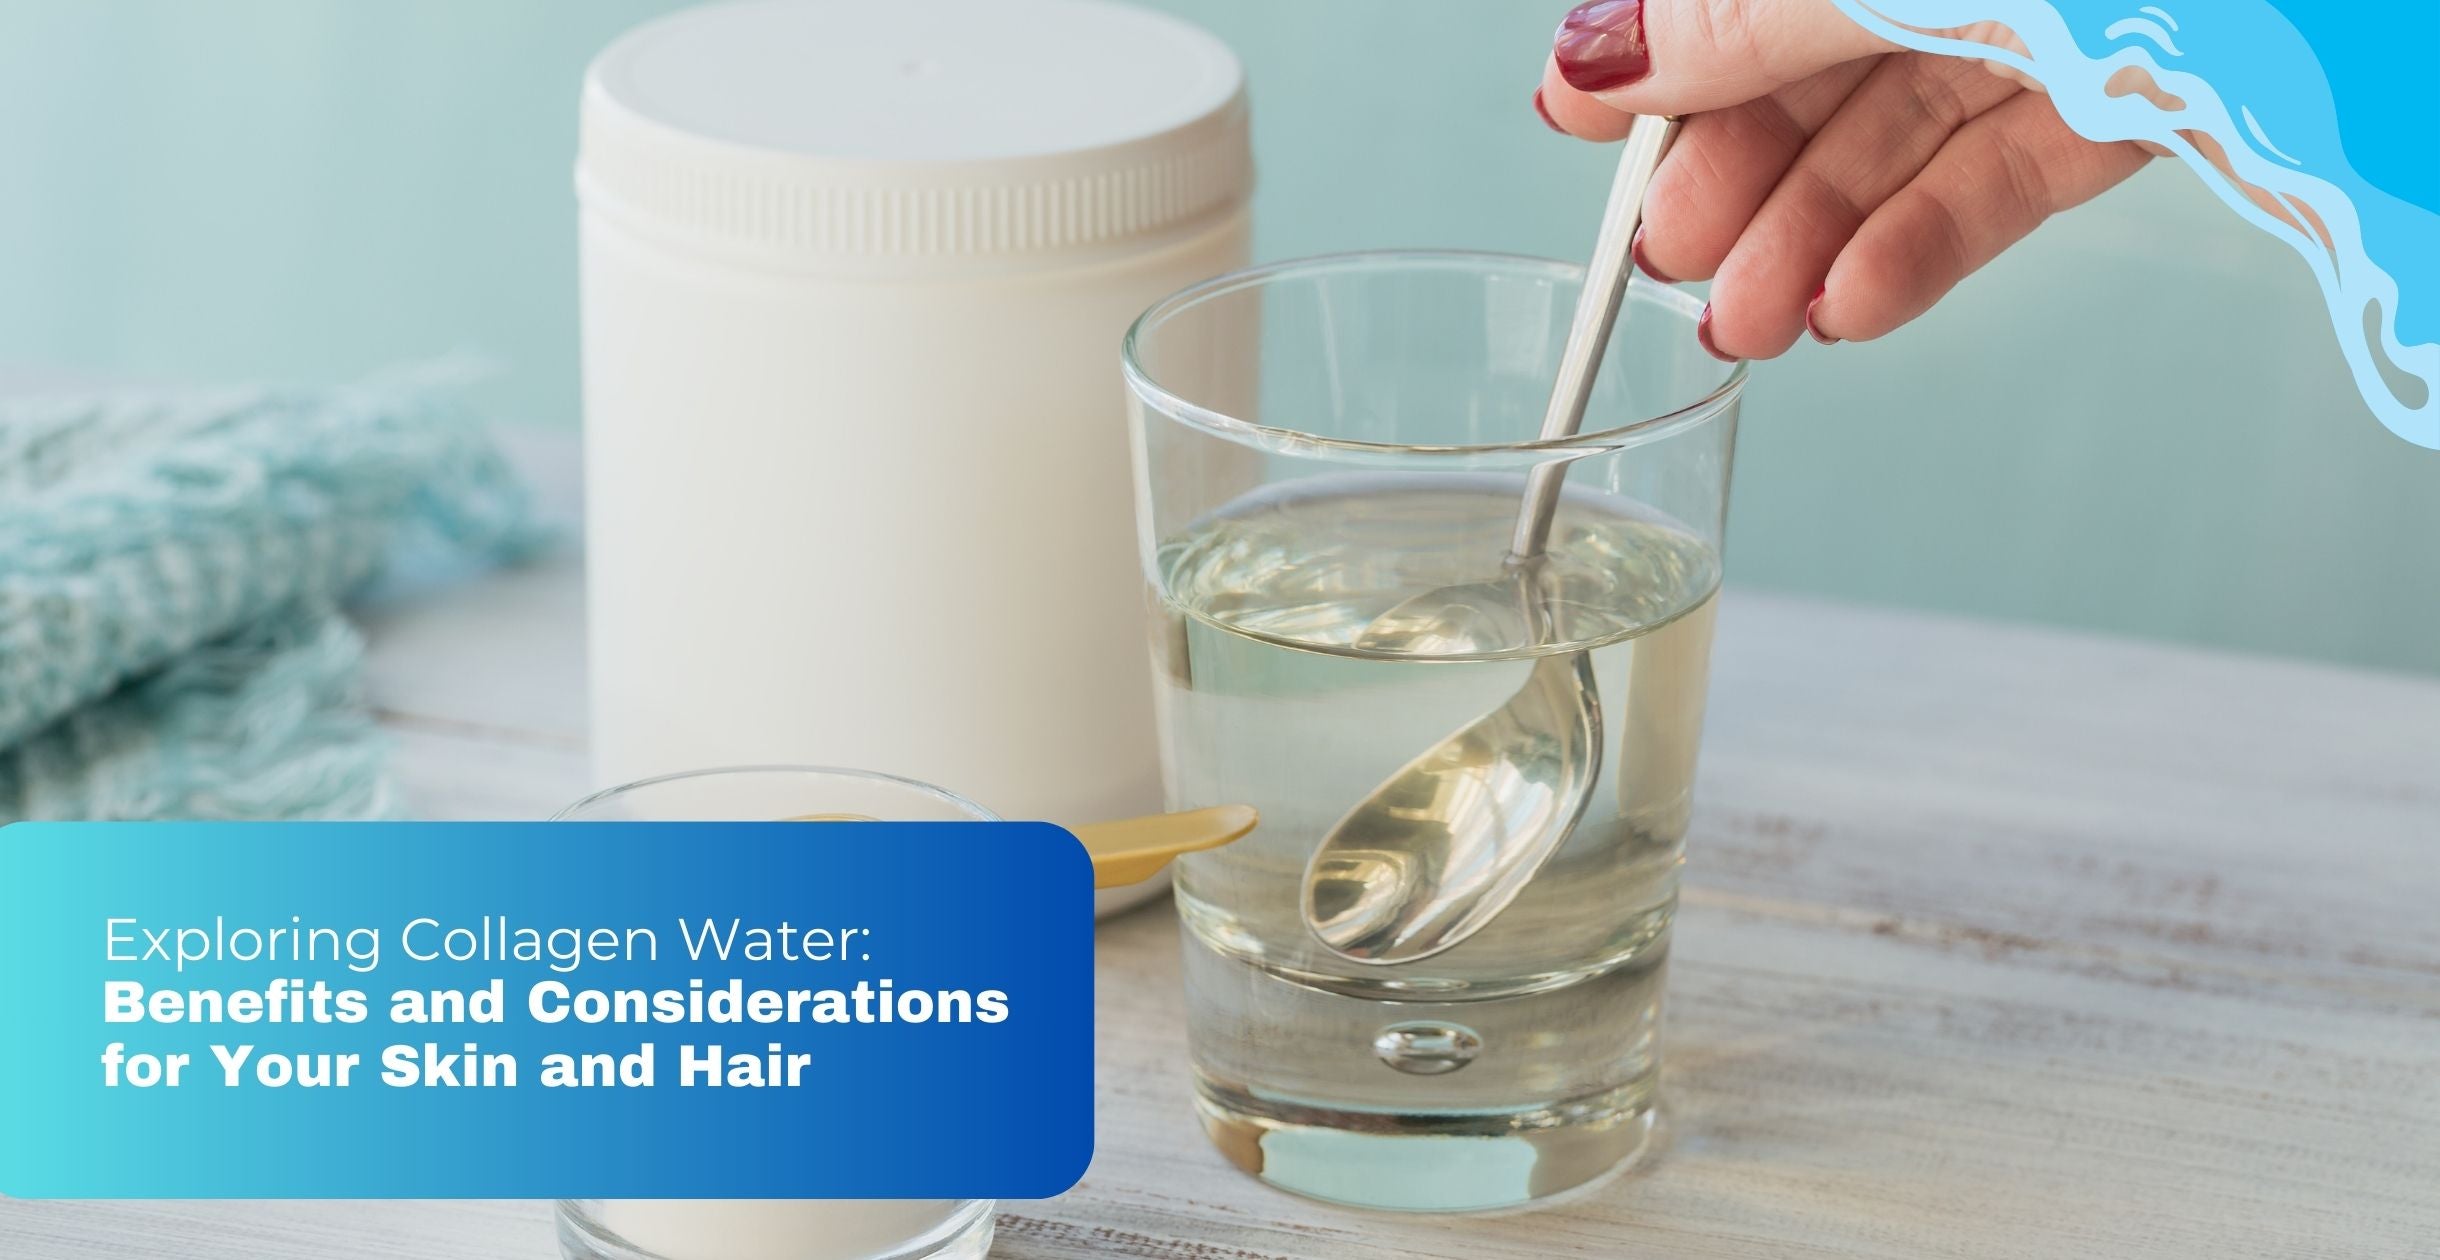 Exploring Collagen Water: Benefits and Considerations for Your Skin and Hair